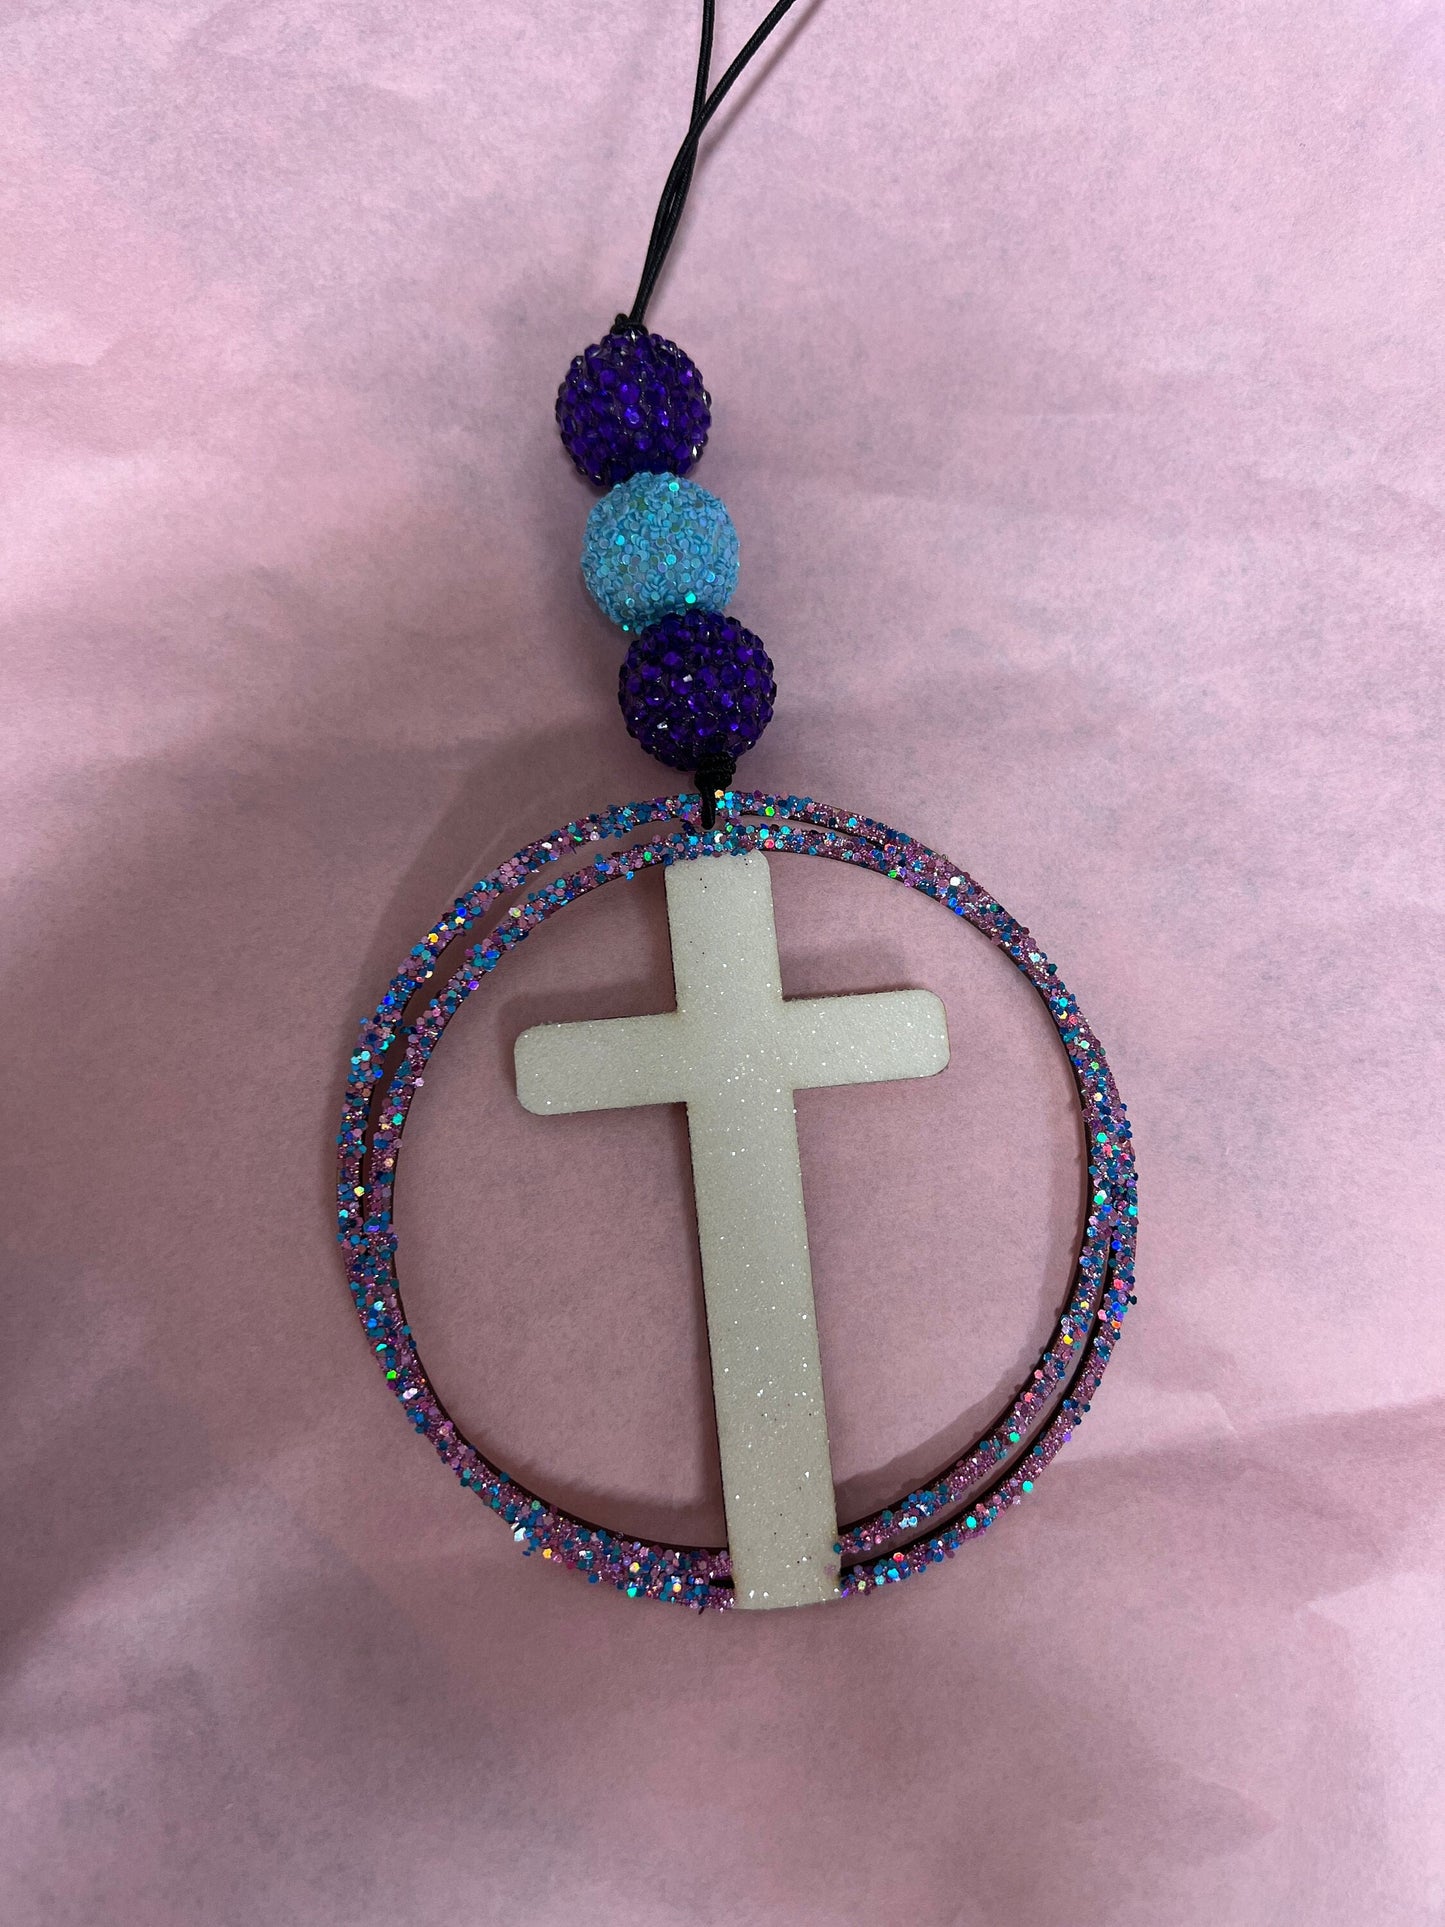 Cross Car Charms - Beads and Glitter